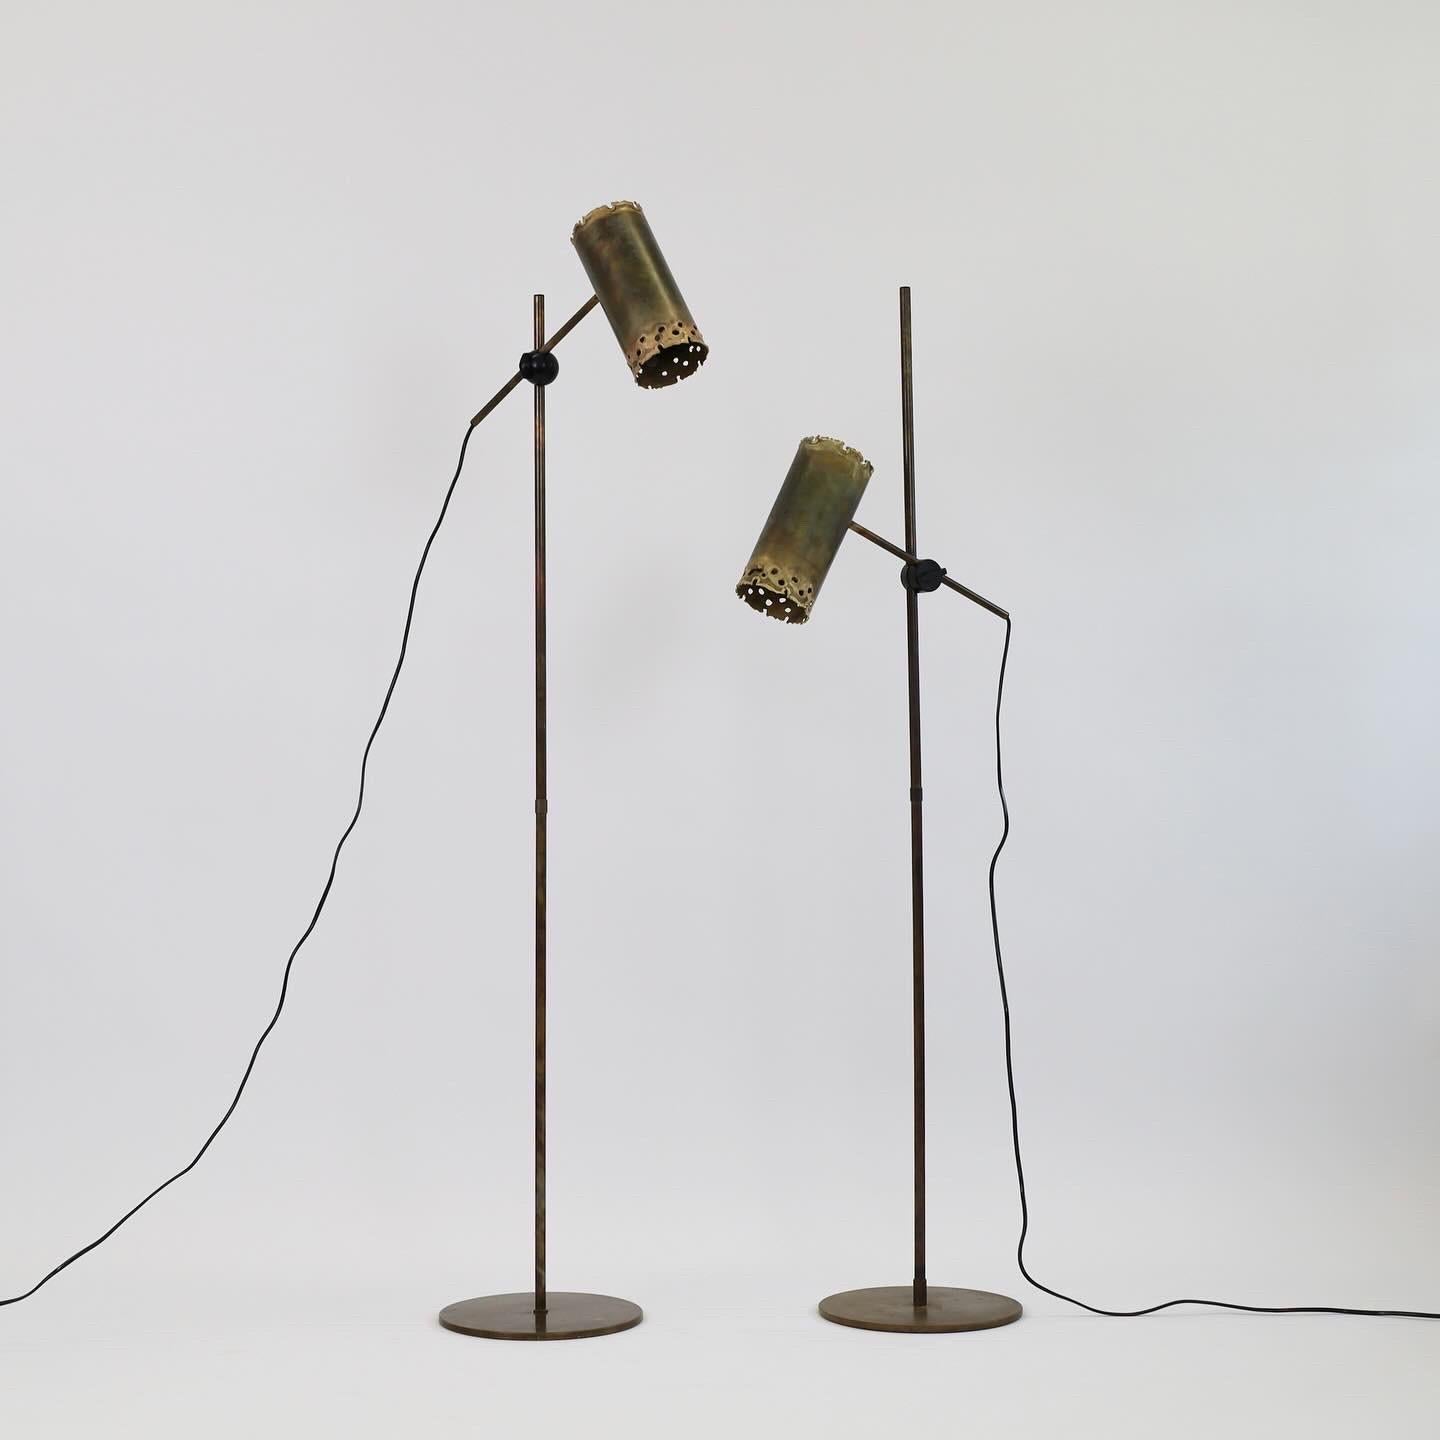 Rare set of brutalist flame-cut brass floor lamps designed Svend Aage Holm Sørensen in the 1960s. True eye-catchers for an exquisite place.  

* Set of flame-cut brass floor lamp with an adjustable shades
* Designer: Svend Aage Holm Sorensen
*